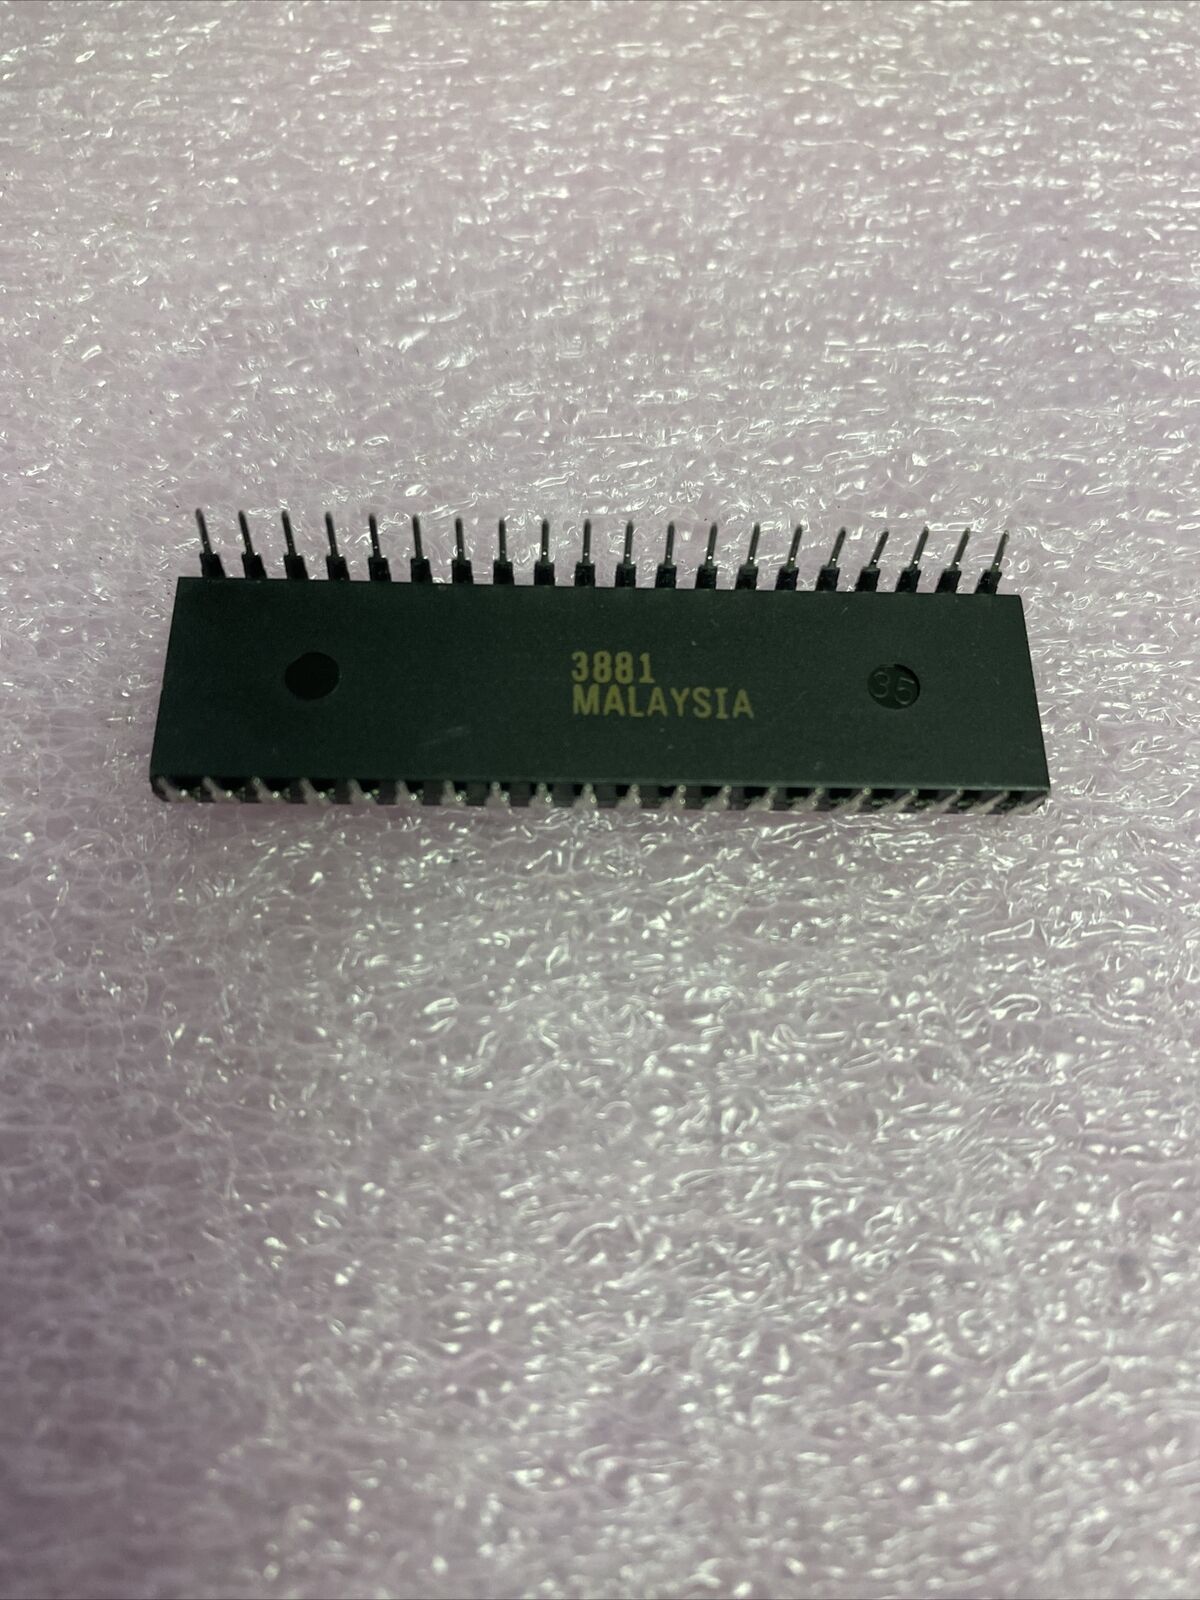 5 pcs IC Z80 PIO chip, MOSTEK MK3881N-4 Likely New Old Stock